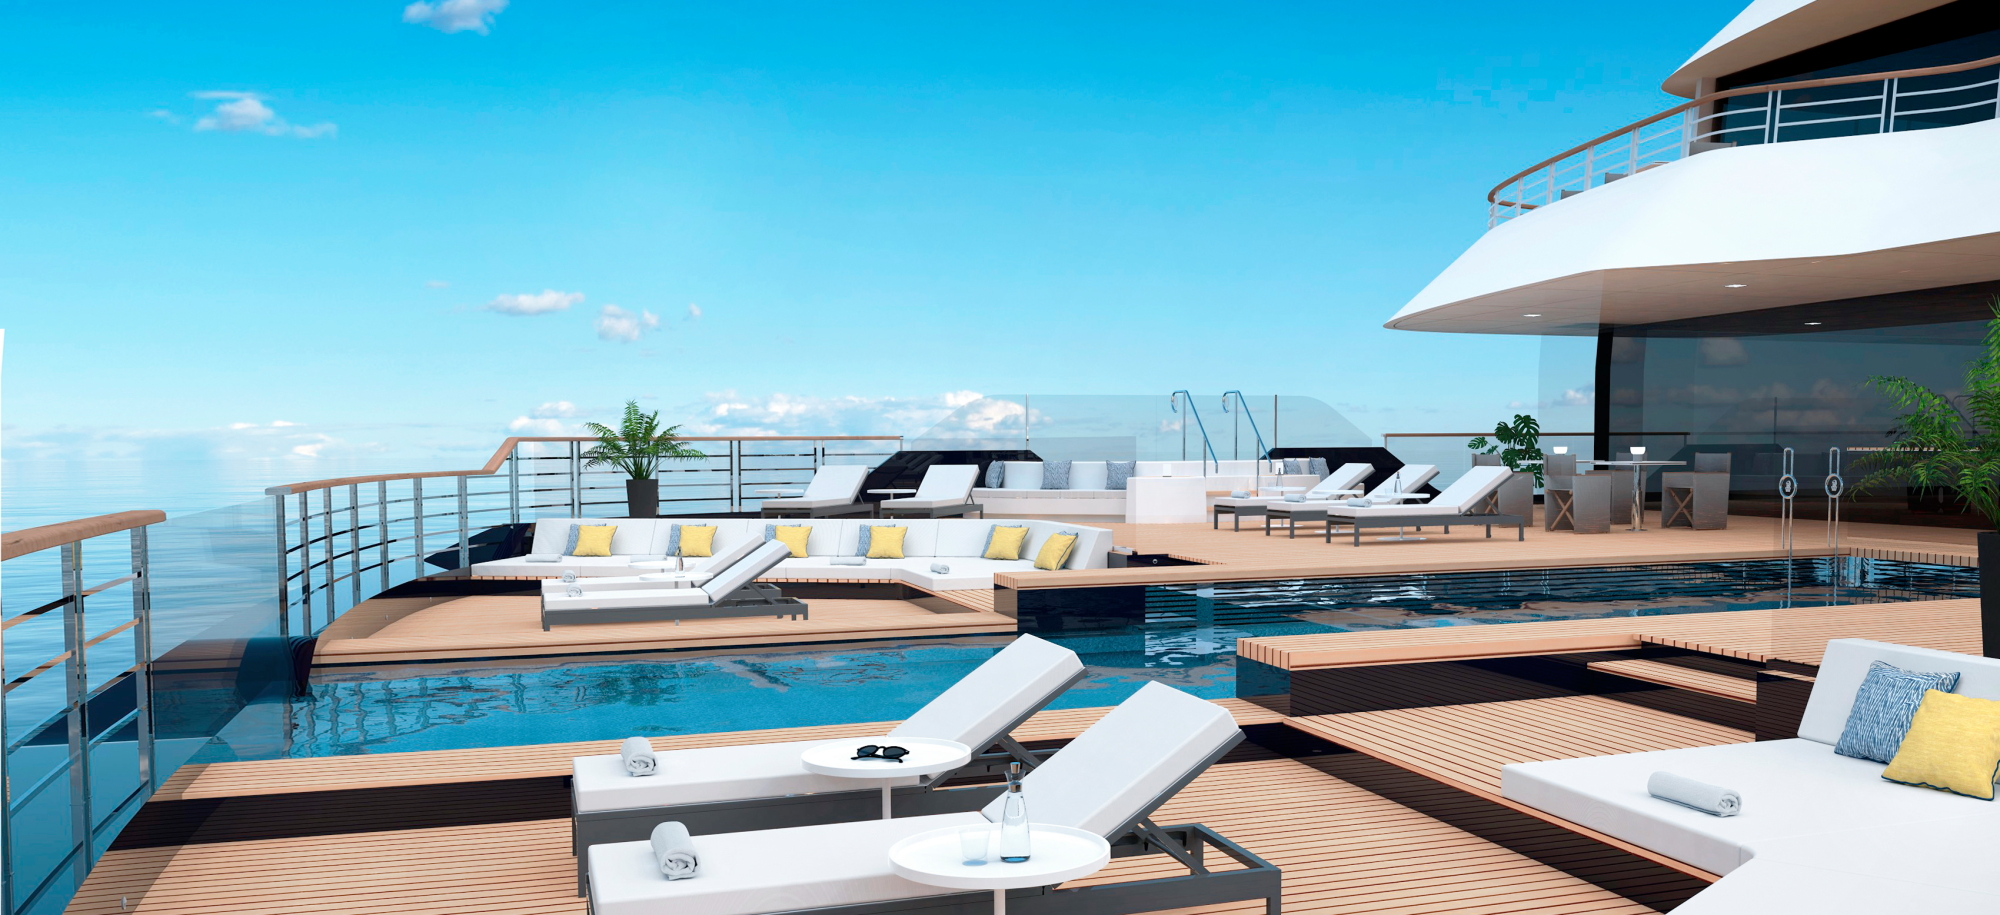 The Ritz-Carlton Yacht Collection is scheduled to set sail in February 2020. Click to enlarge.